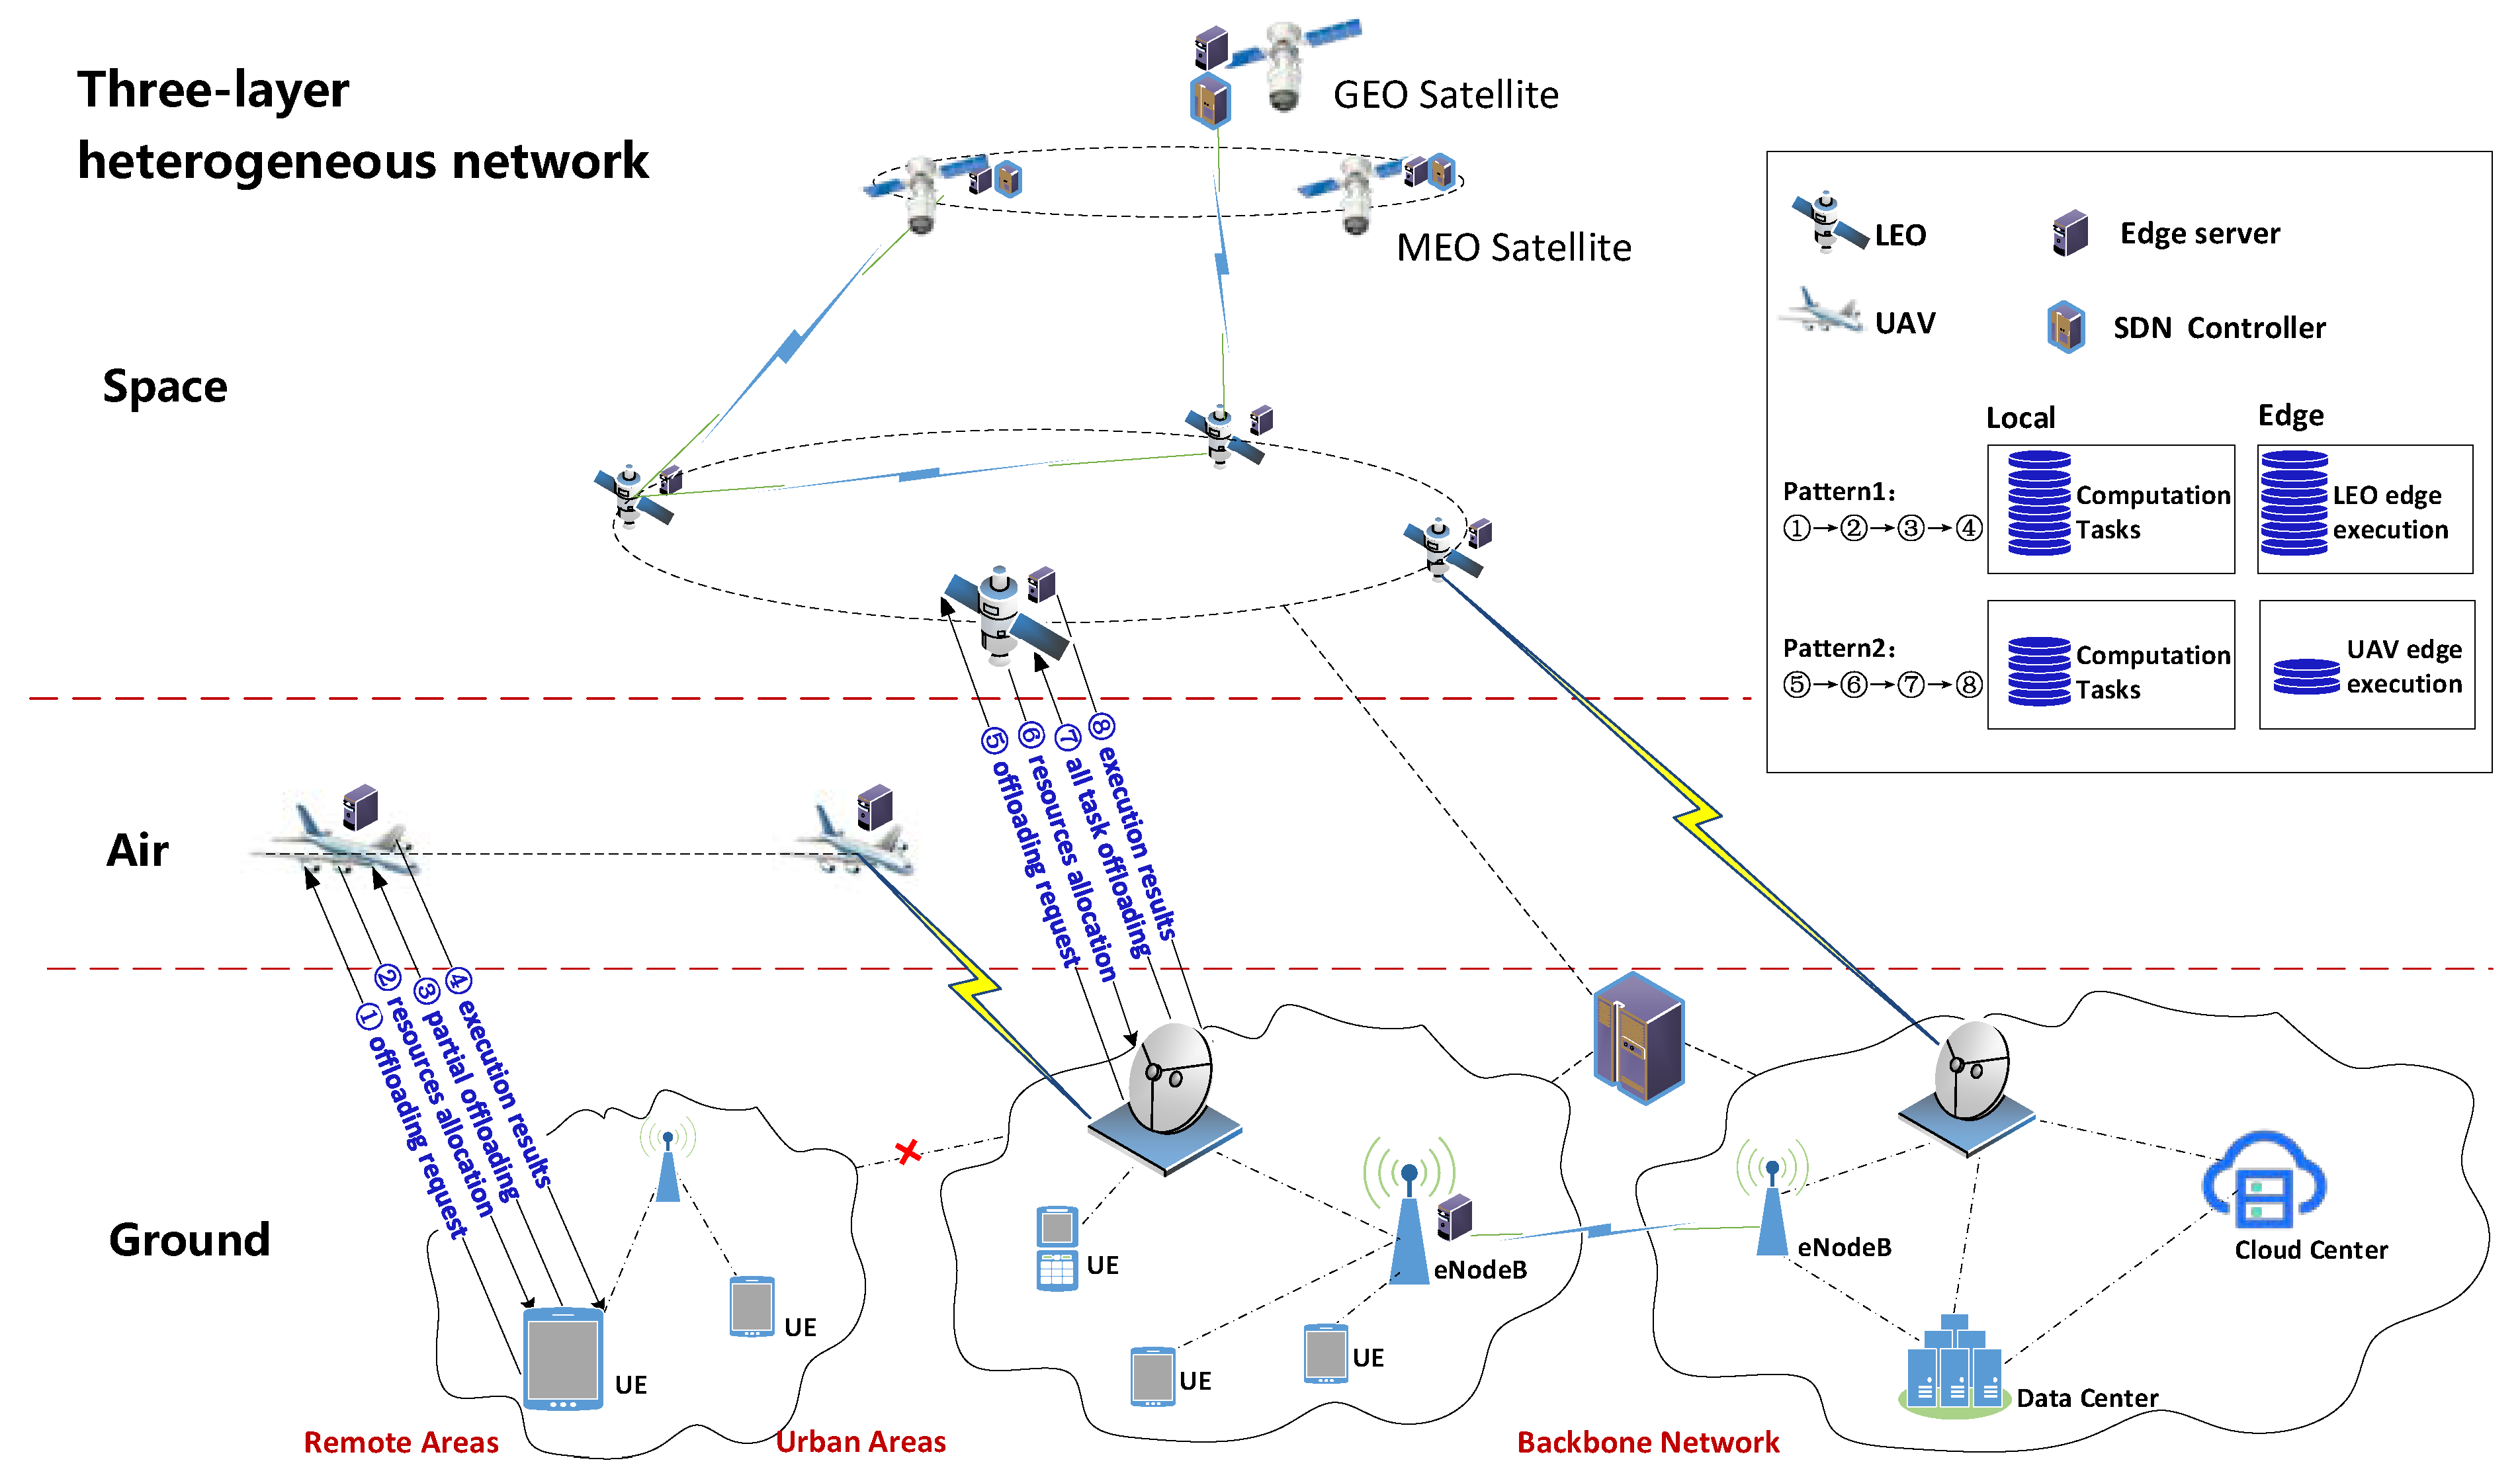 Novel Approaches for Resource Management Across Edge Servers   International Journal of Networked and Distributed Computing